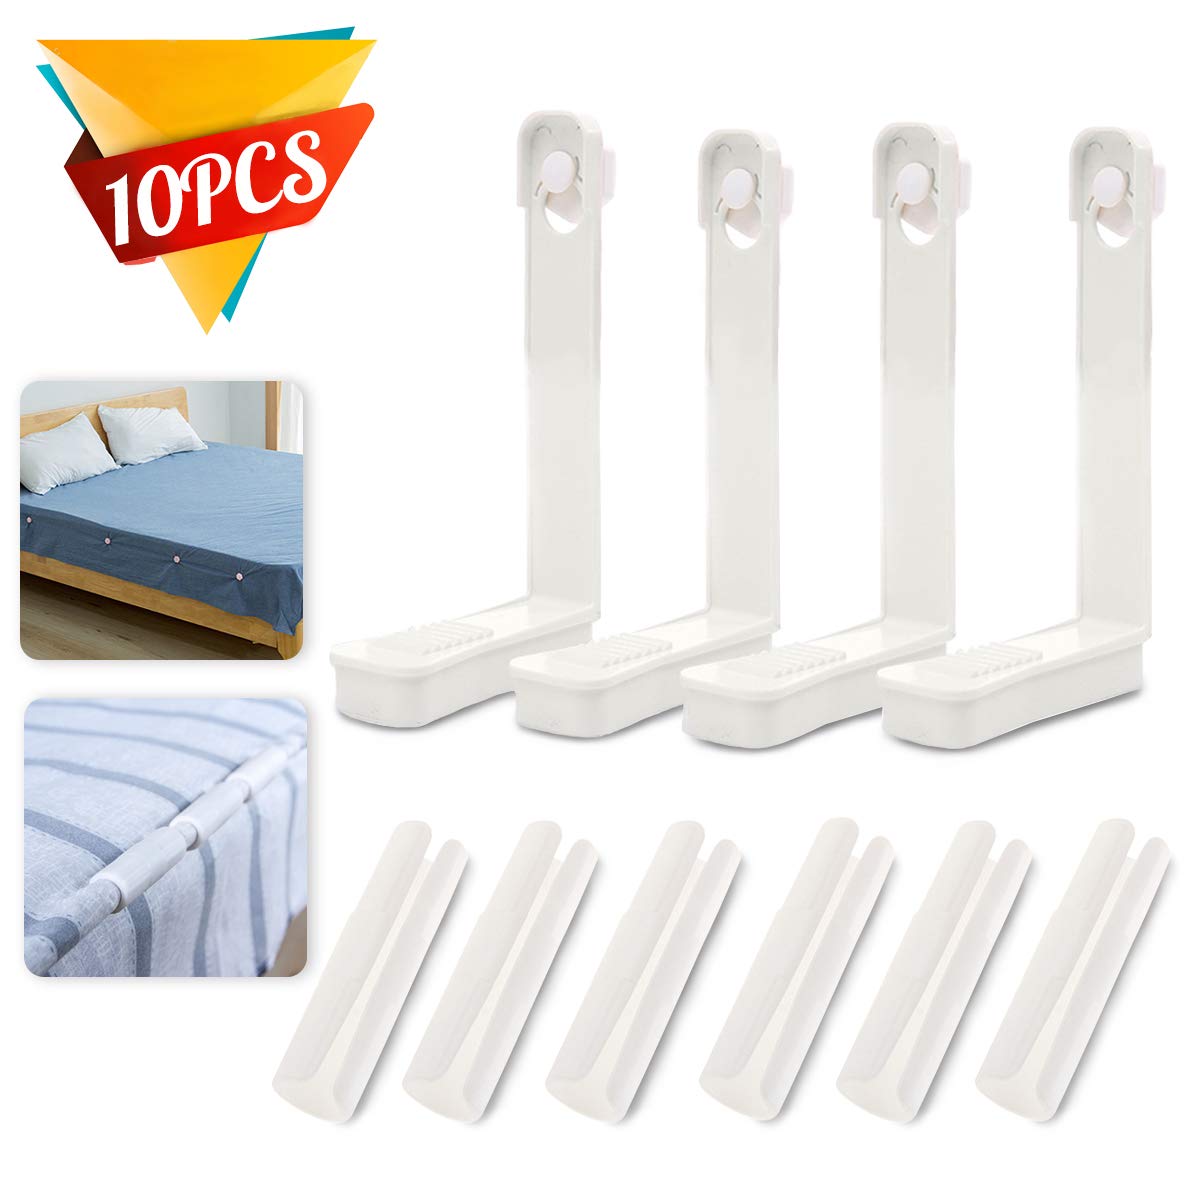 Book Cover Jeteven Bed Sheet Fasteners Fitted Sheet Clips,4Pcs The New Sheet Clip is Fixed for All Bedsheets Fitted Sheets Flat Sheets Long Type (White)